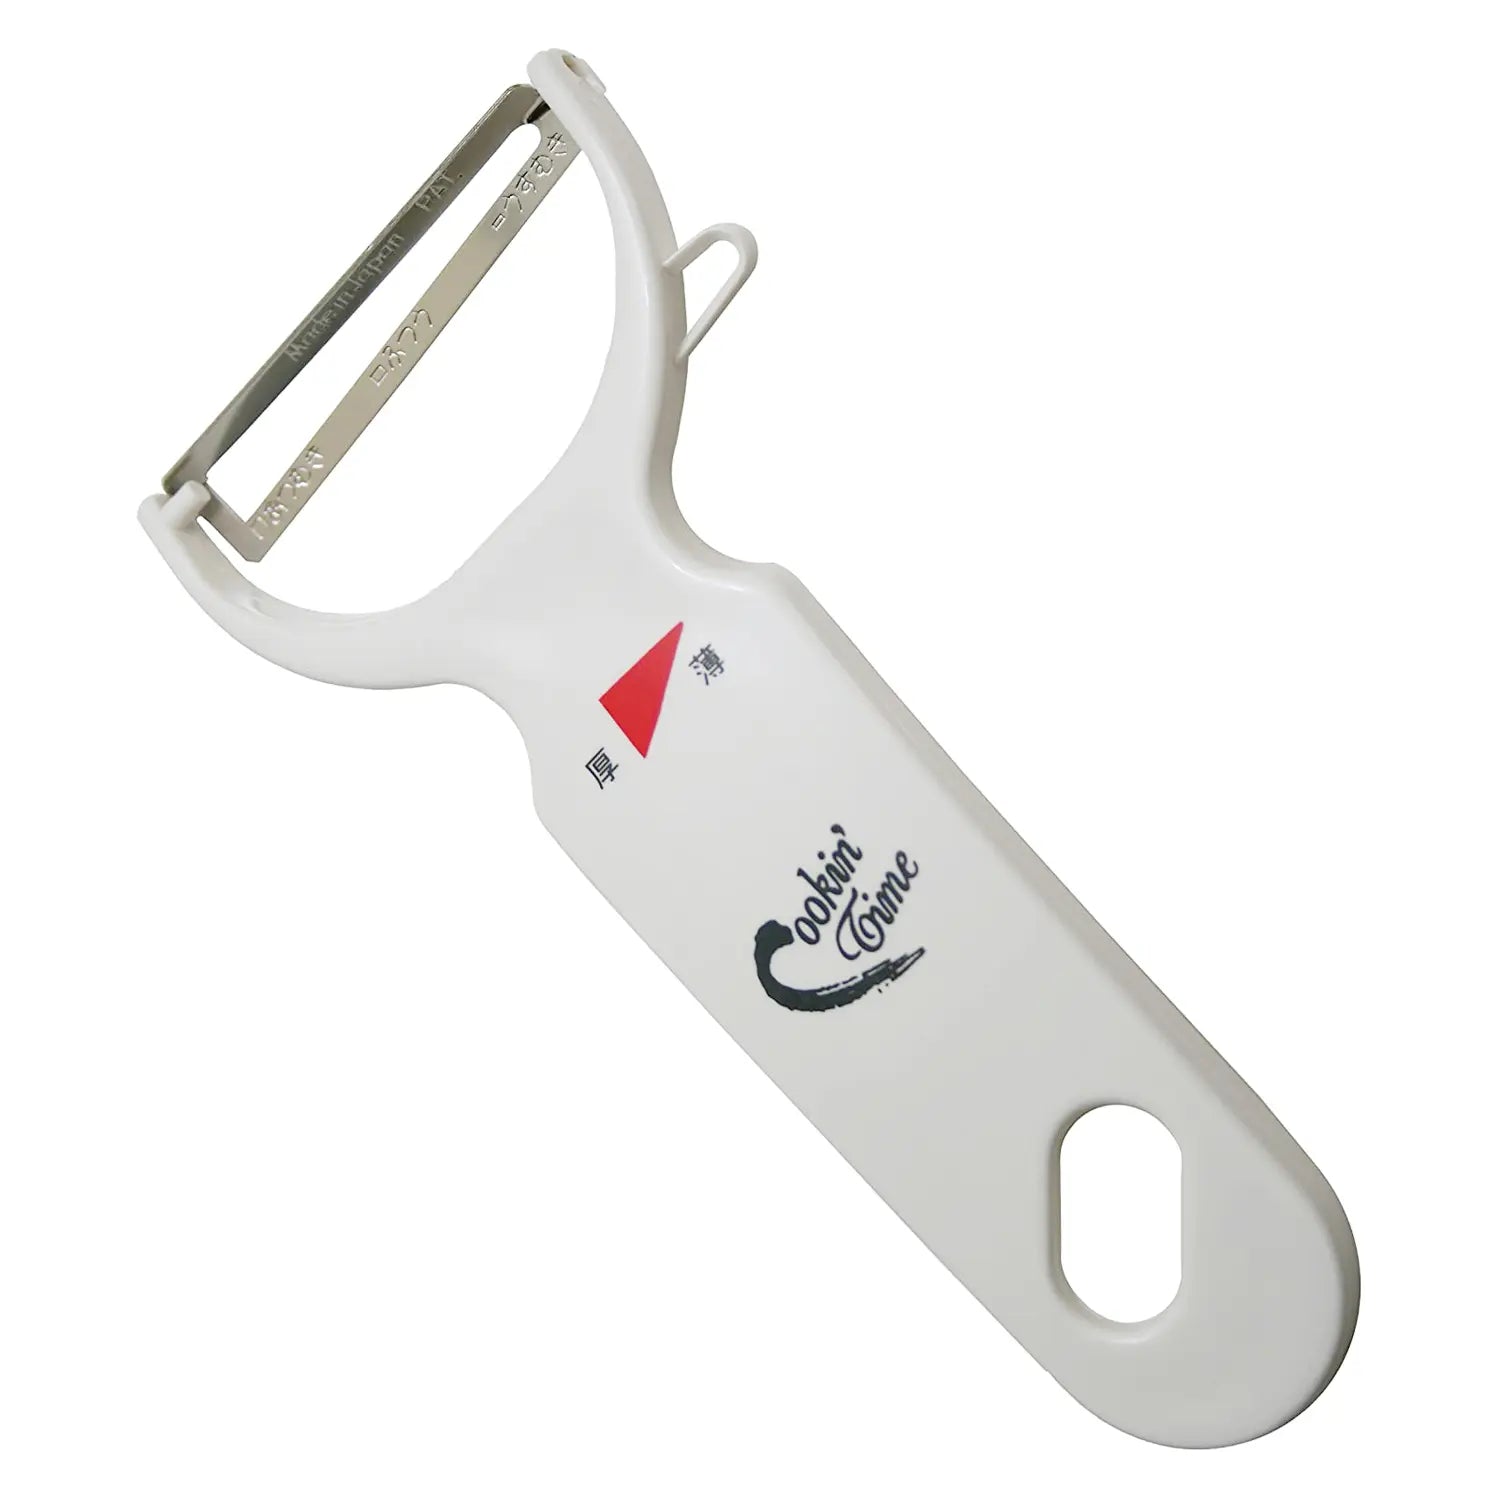 Prince Stainless Steel Peeler - Efficient and Durable Kitchen Tool